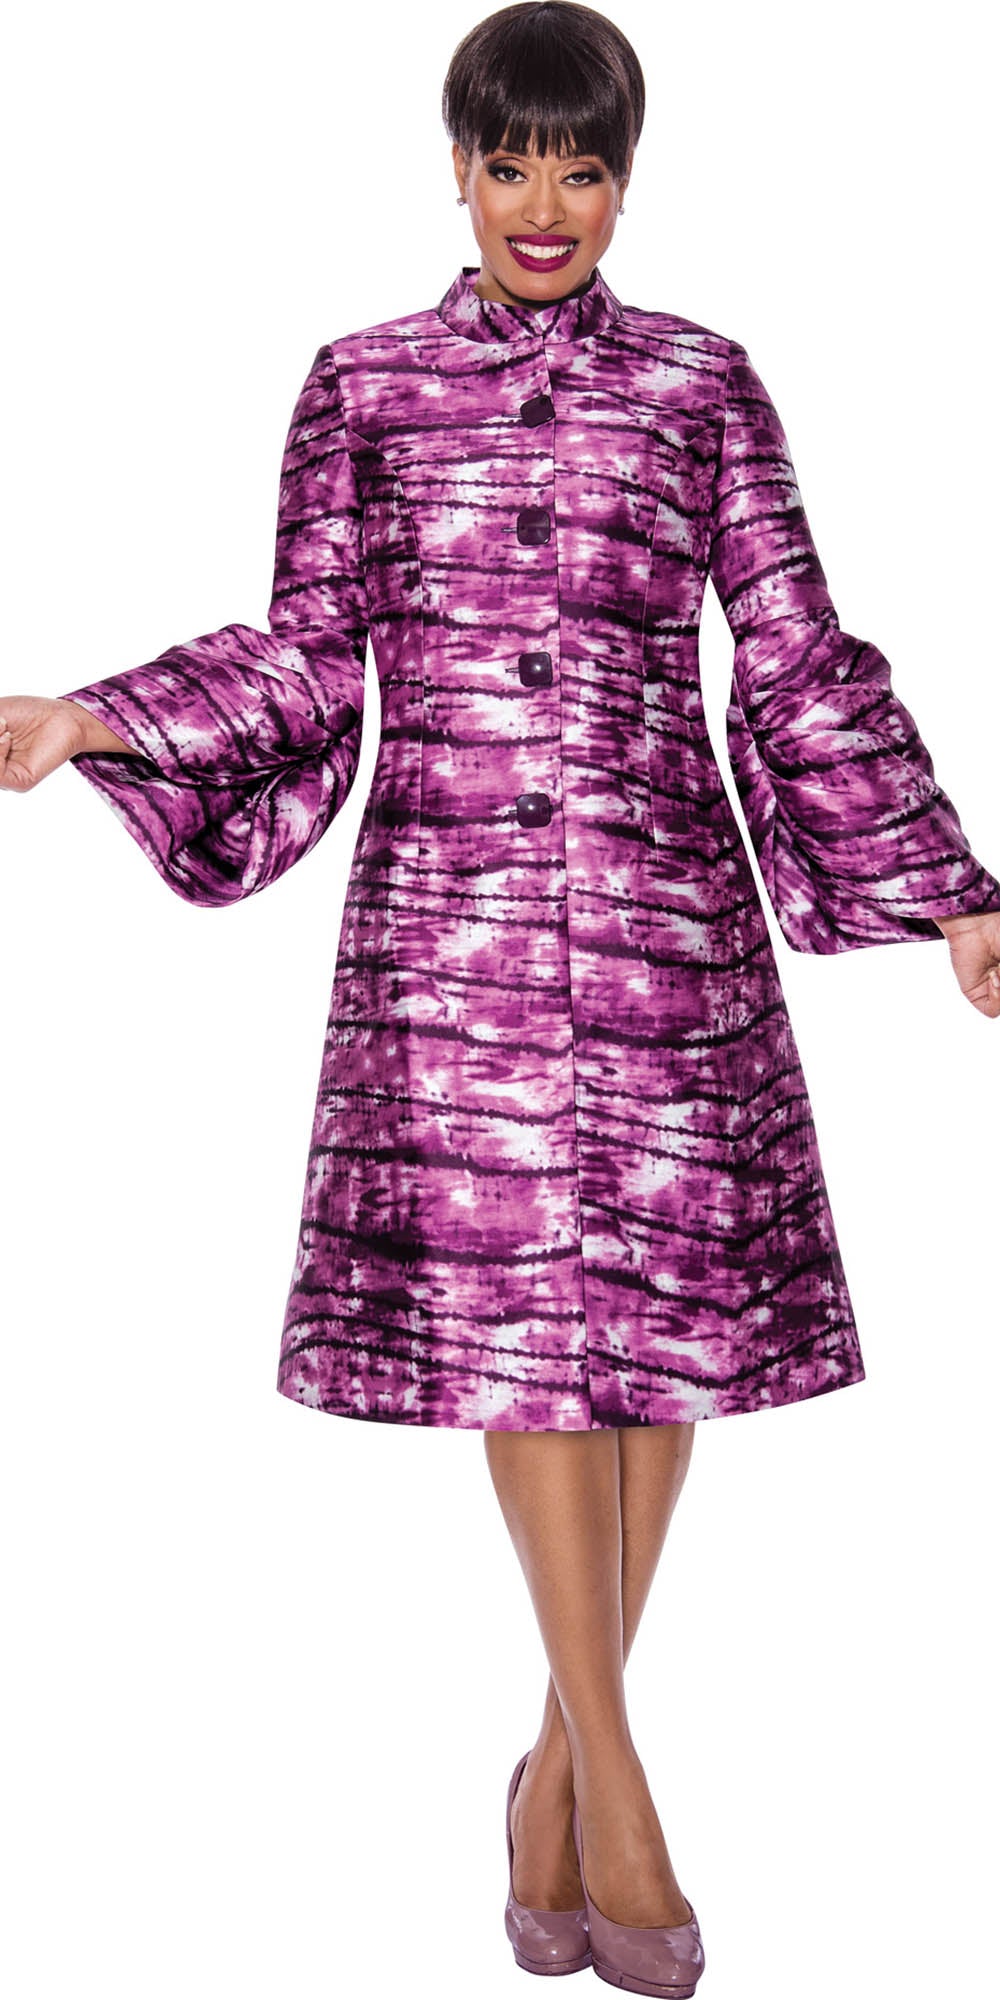 Dresses by Nubiano - 12222 - Purple Print 2pc Button Front Jacket Dress